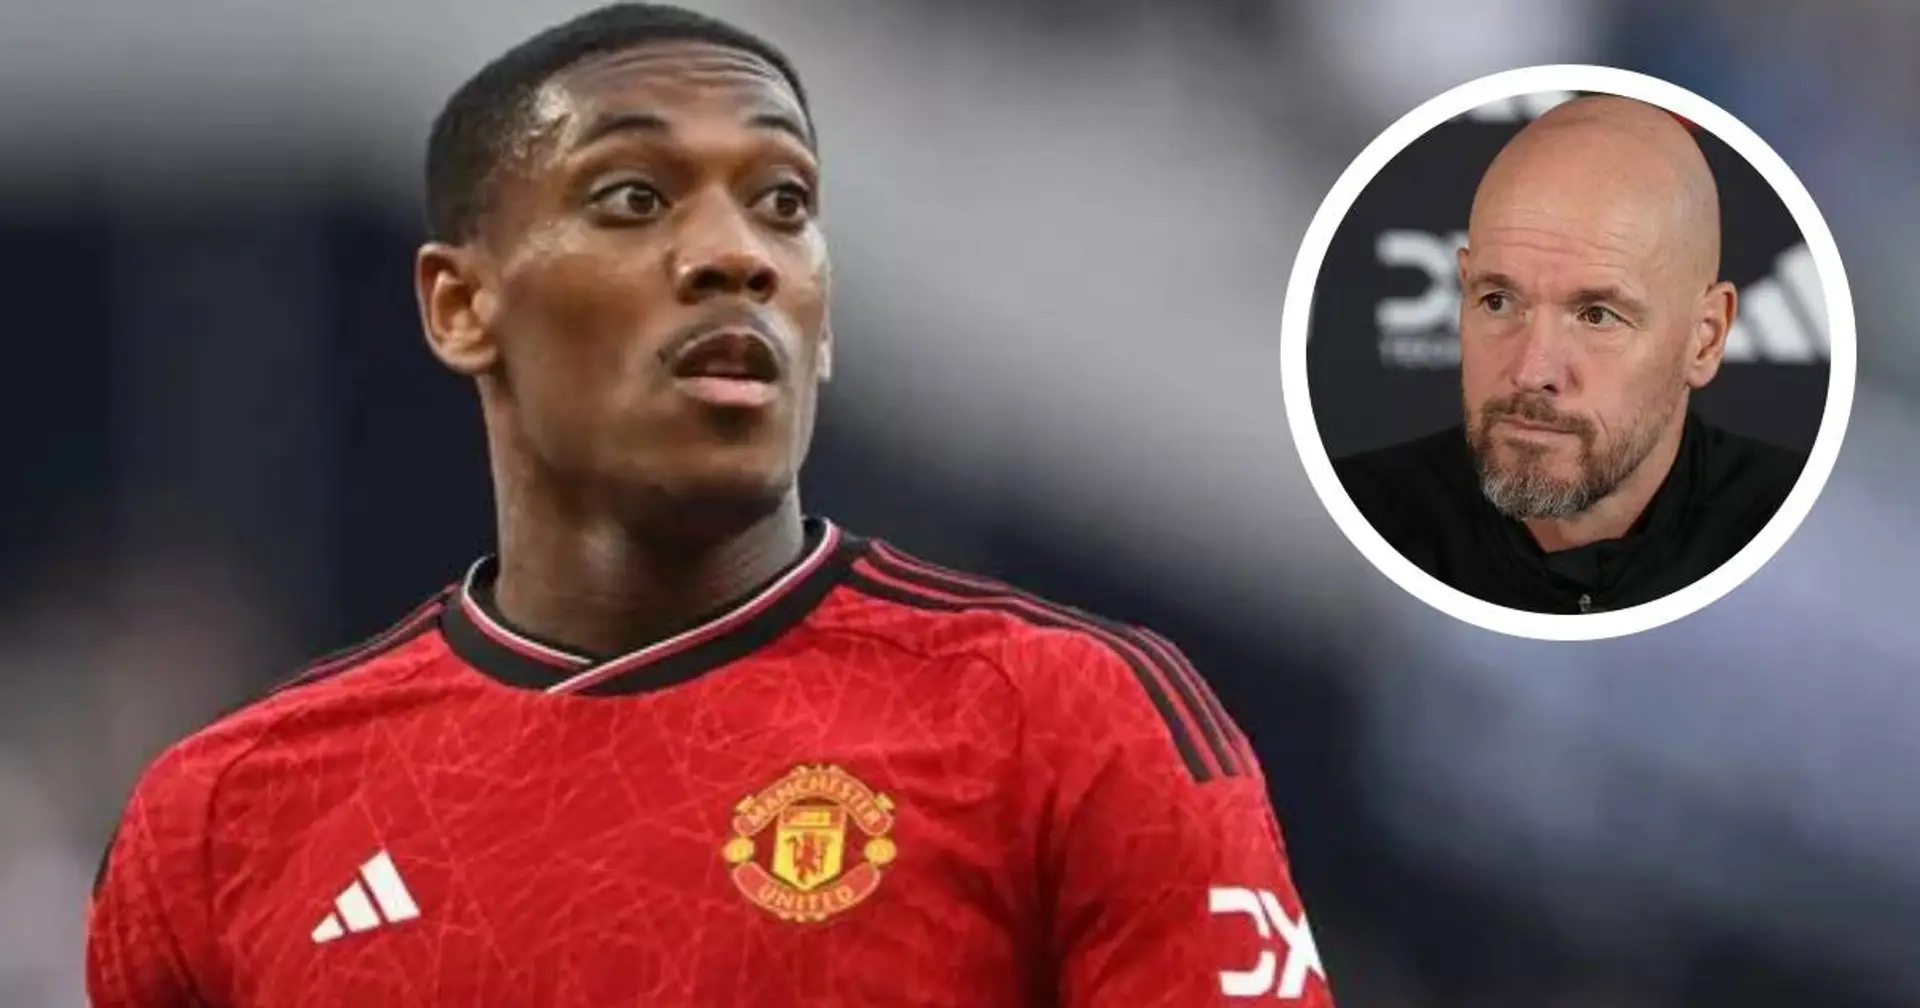 Ten Hag confirms Martial among Man United players up for new contract